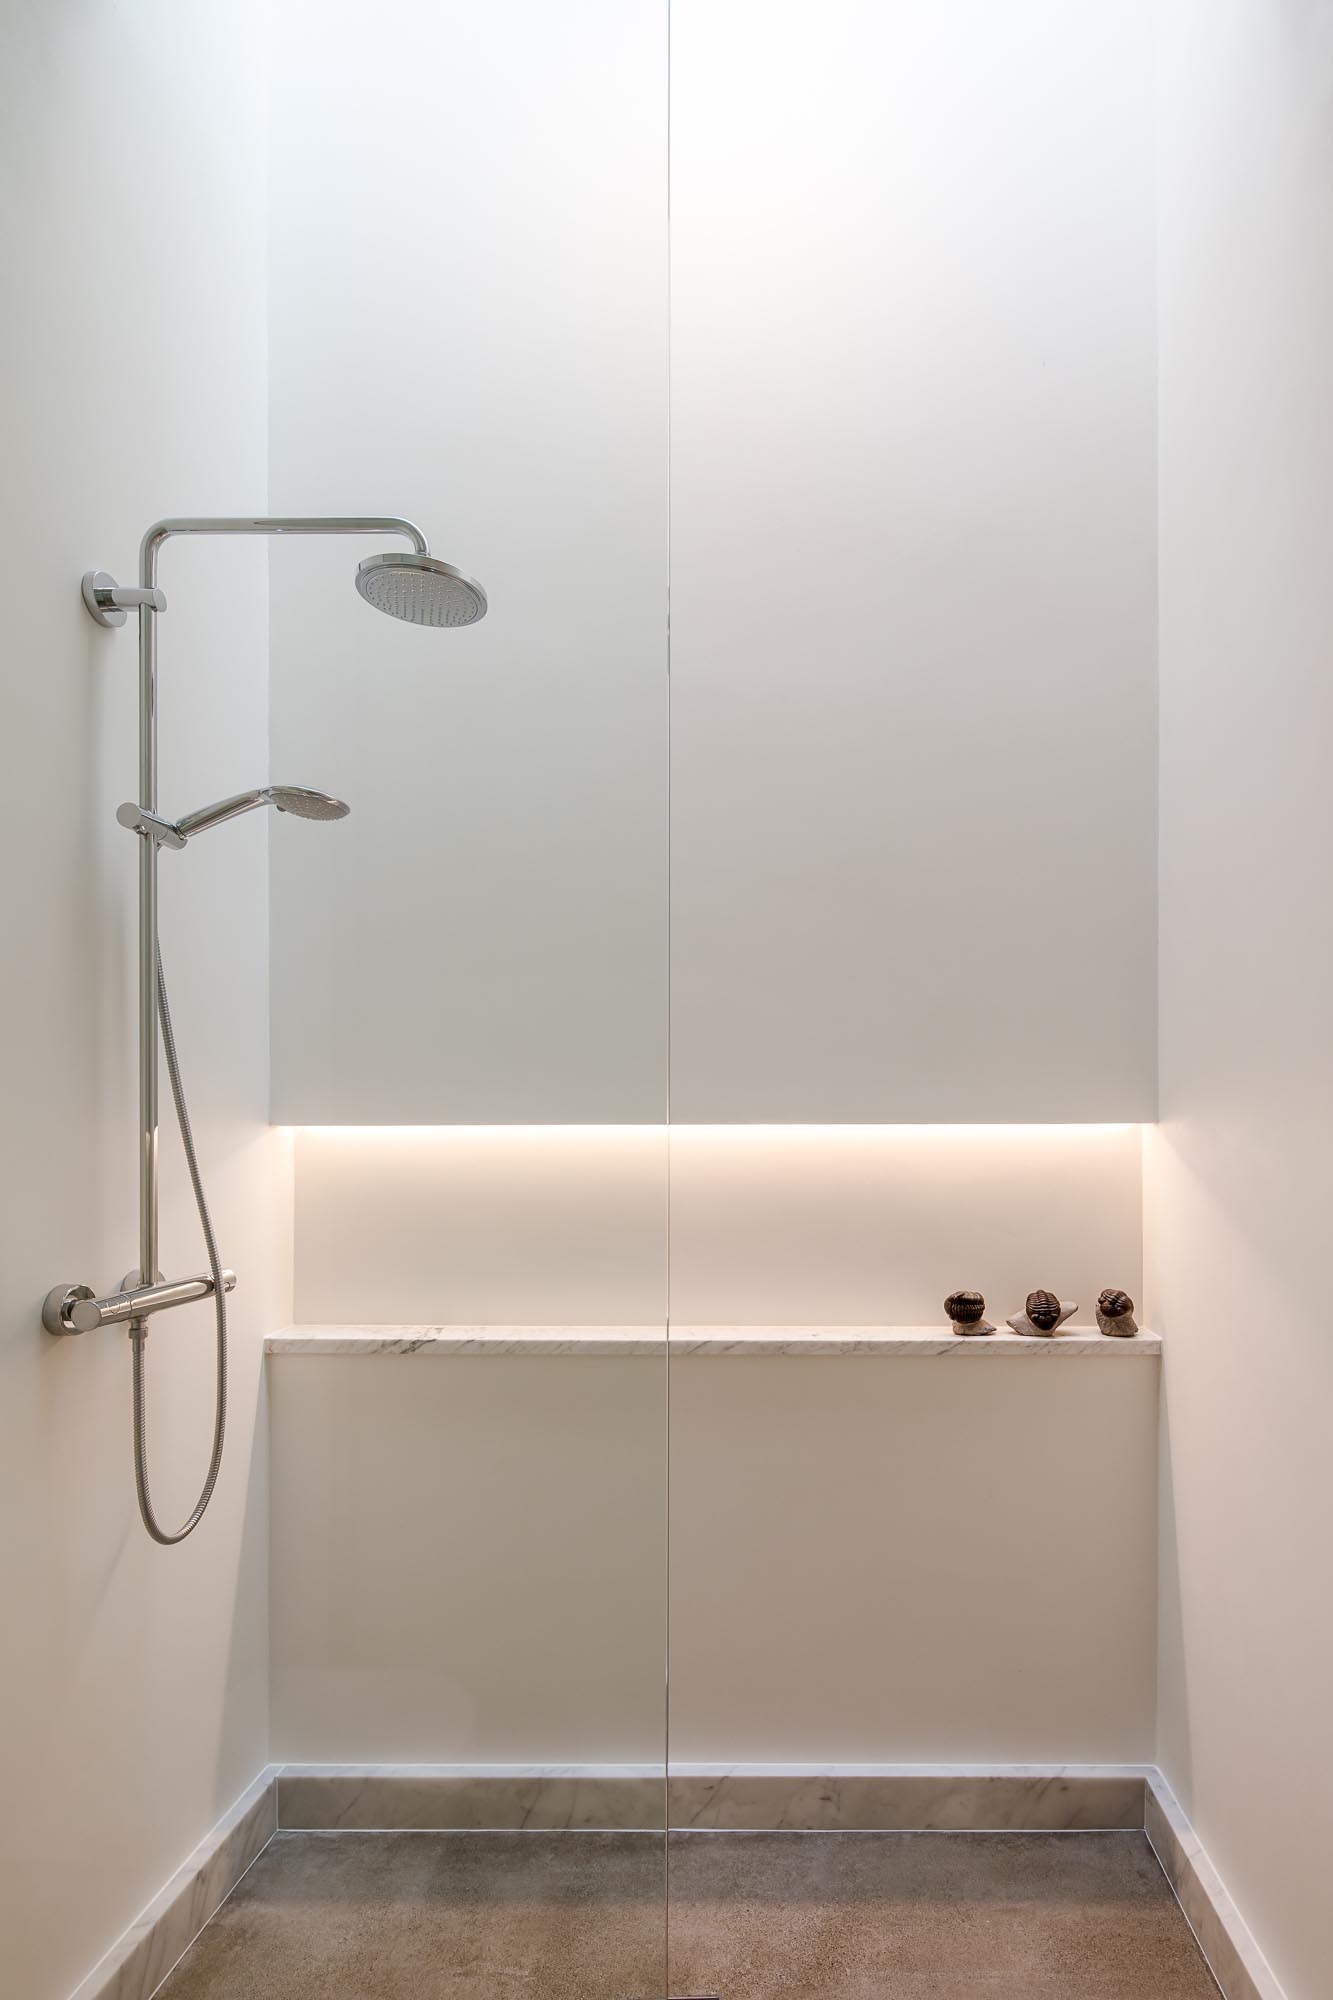 This modern en-suite bathroom has a backlit mirror, a floating vanity, and a walk-in shower with a shelving niche.